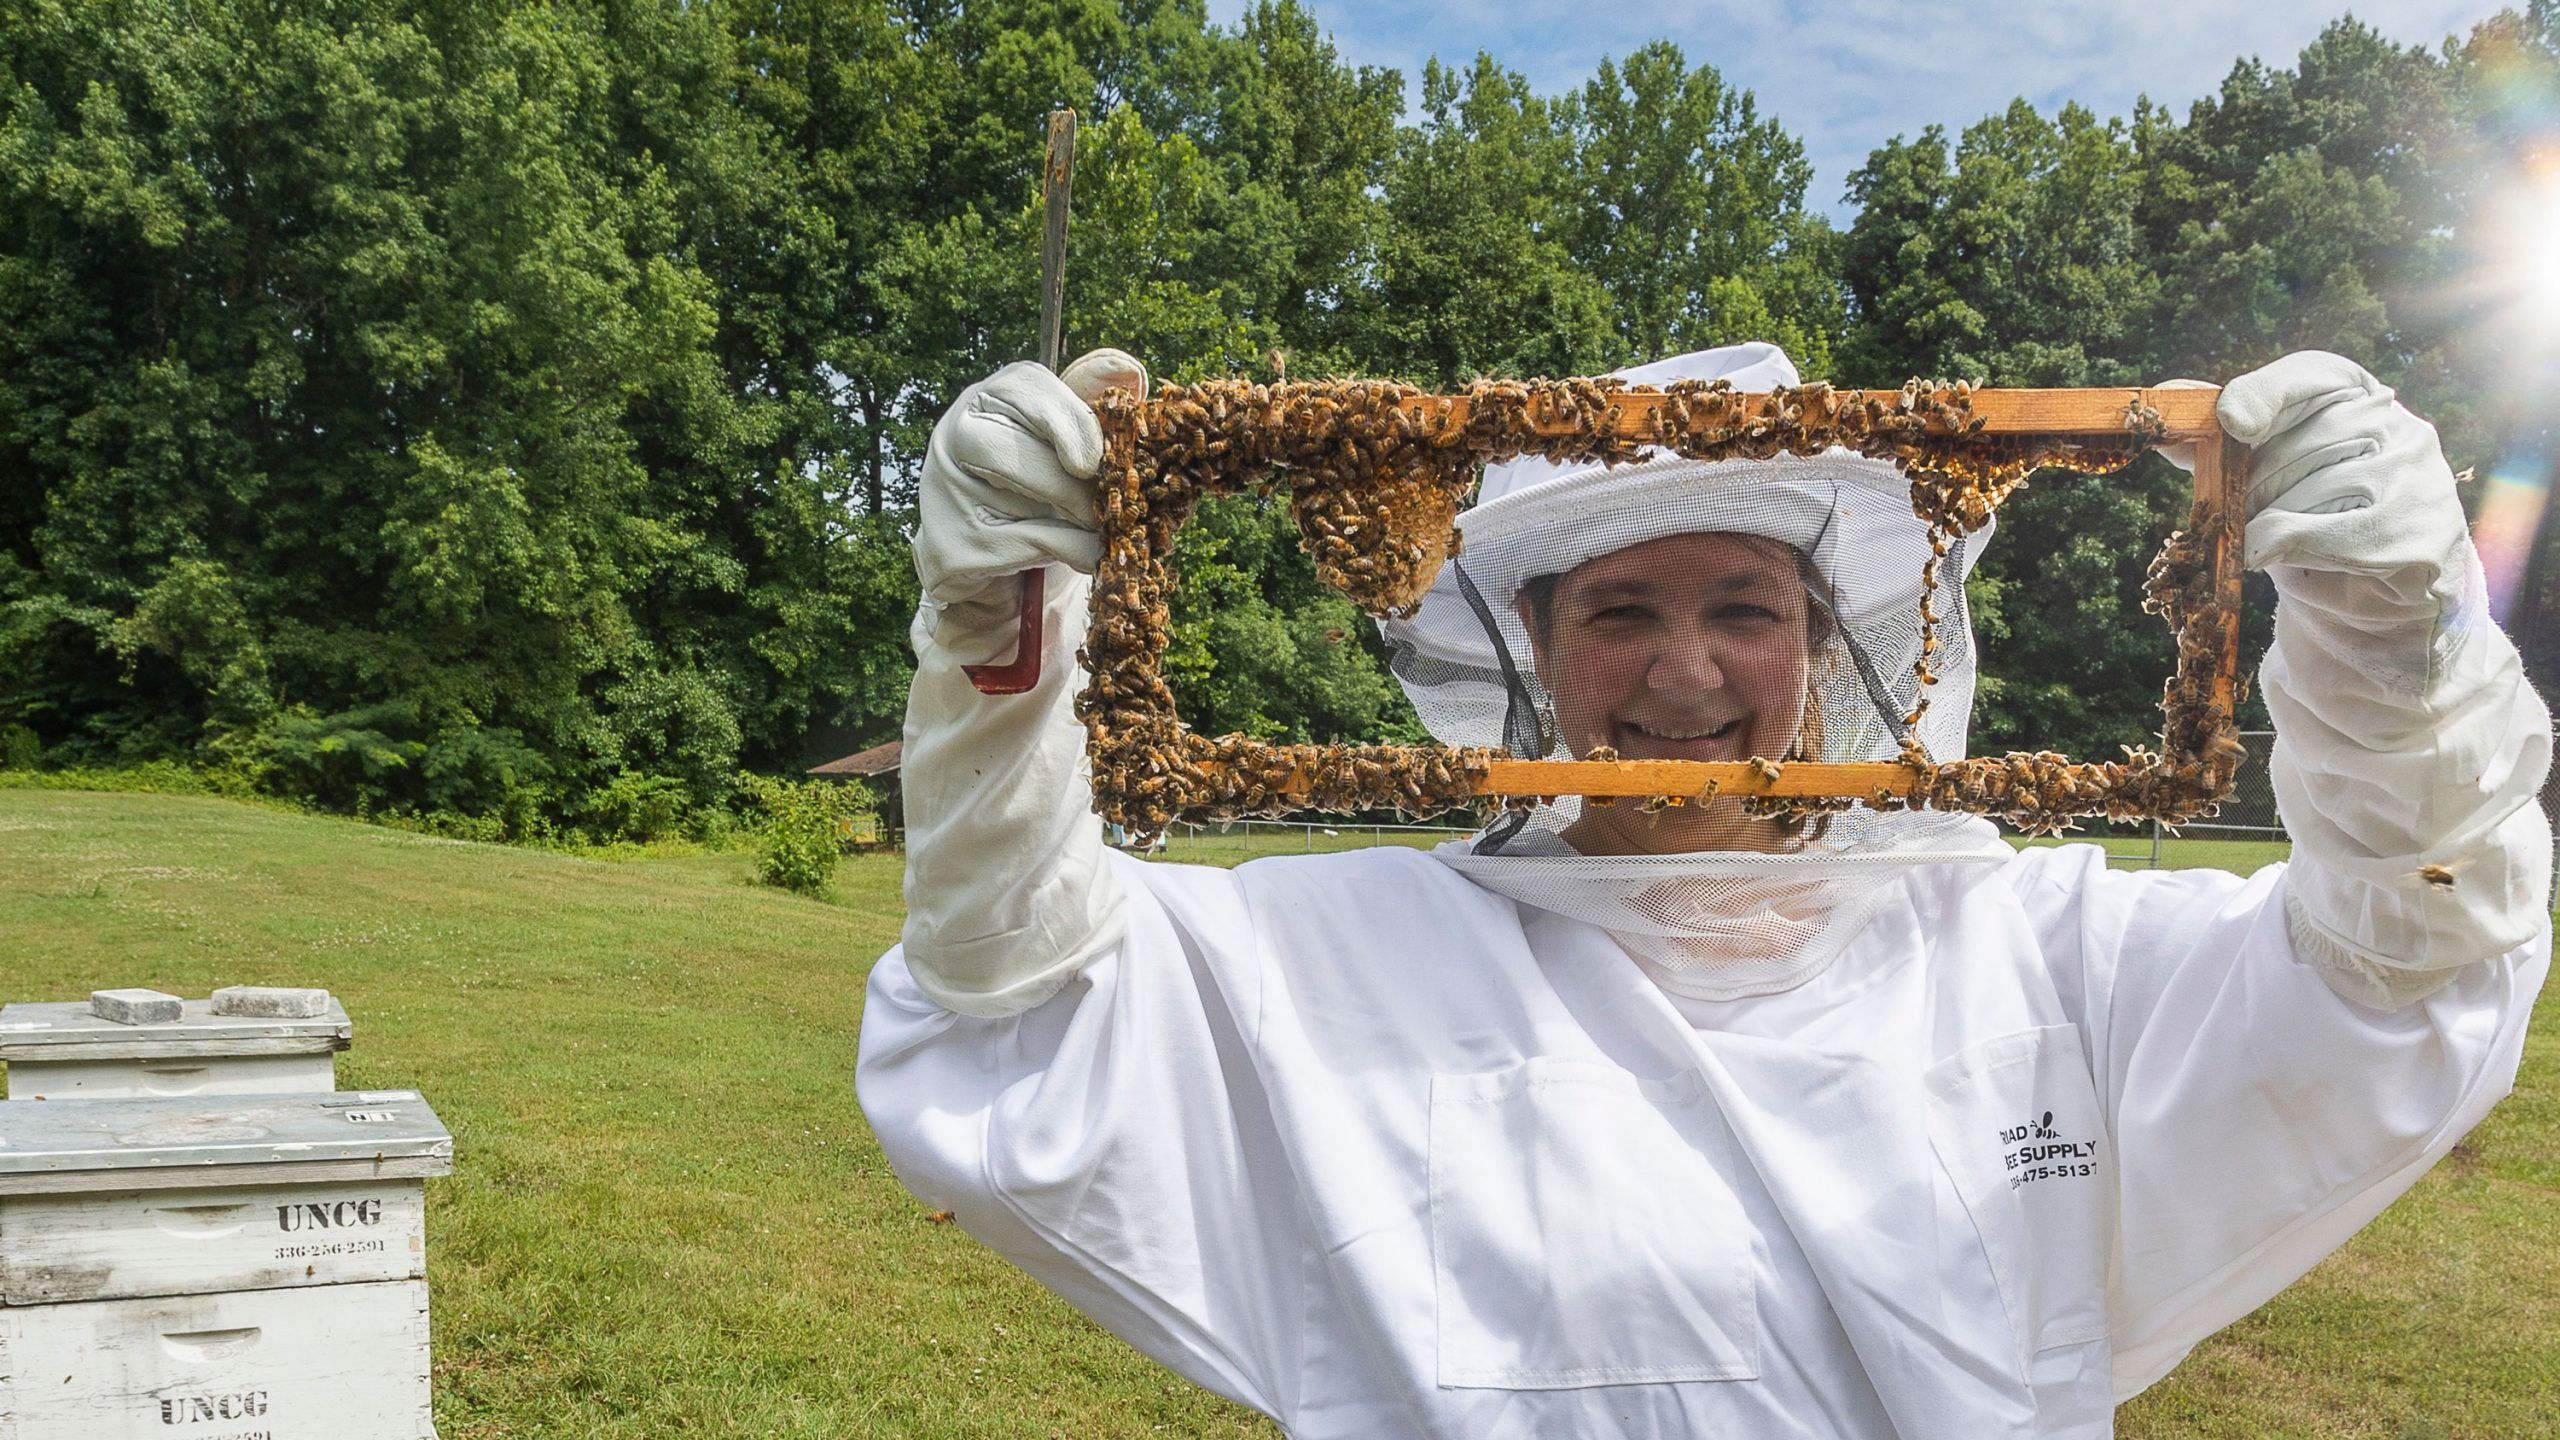 A person in beekeeping gear holding a rectangular object covered in bees